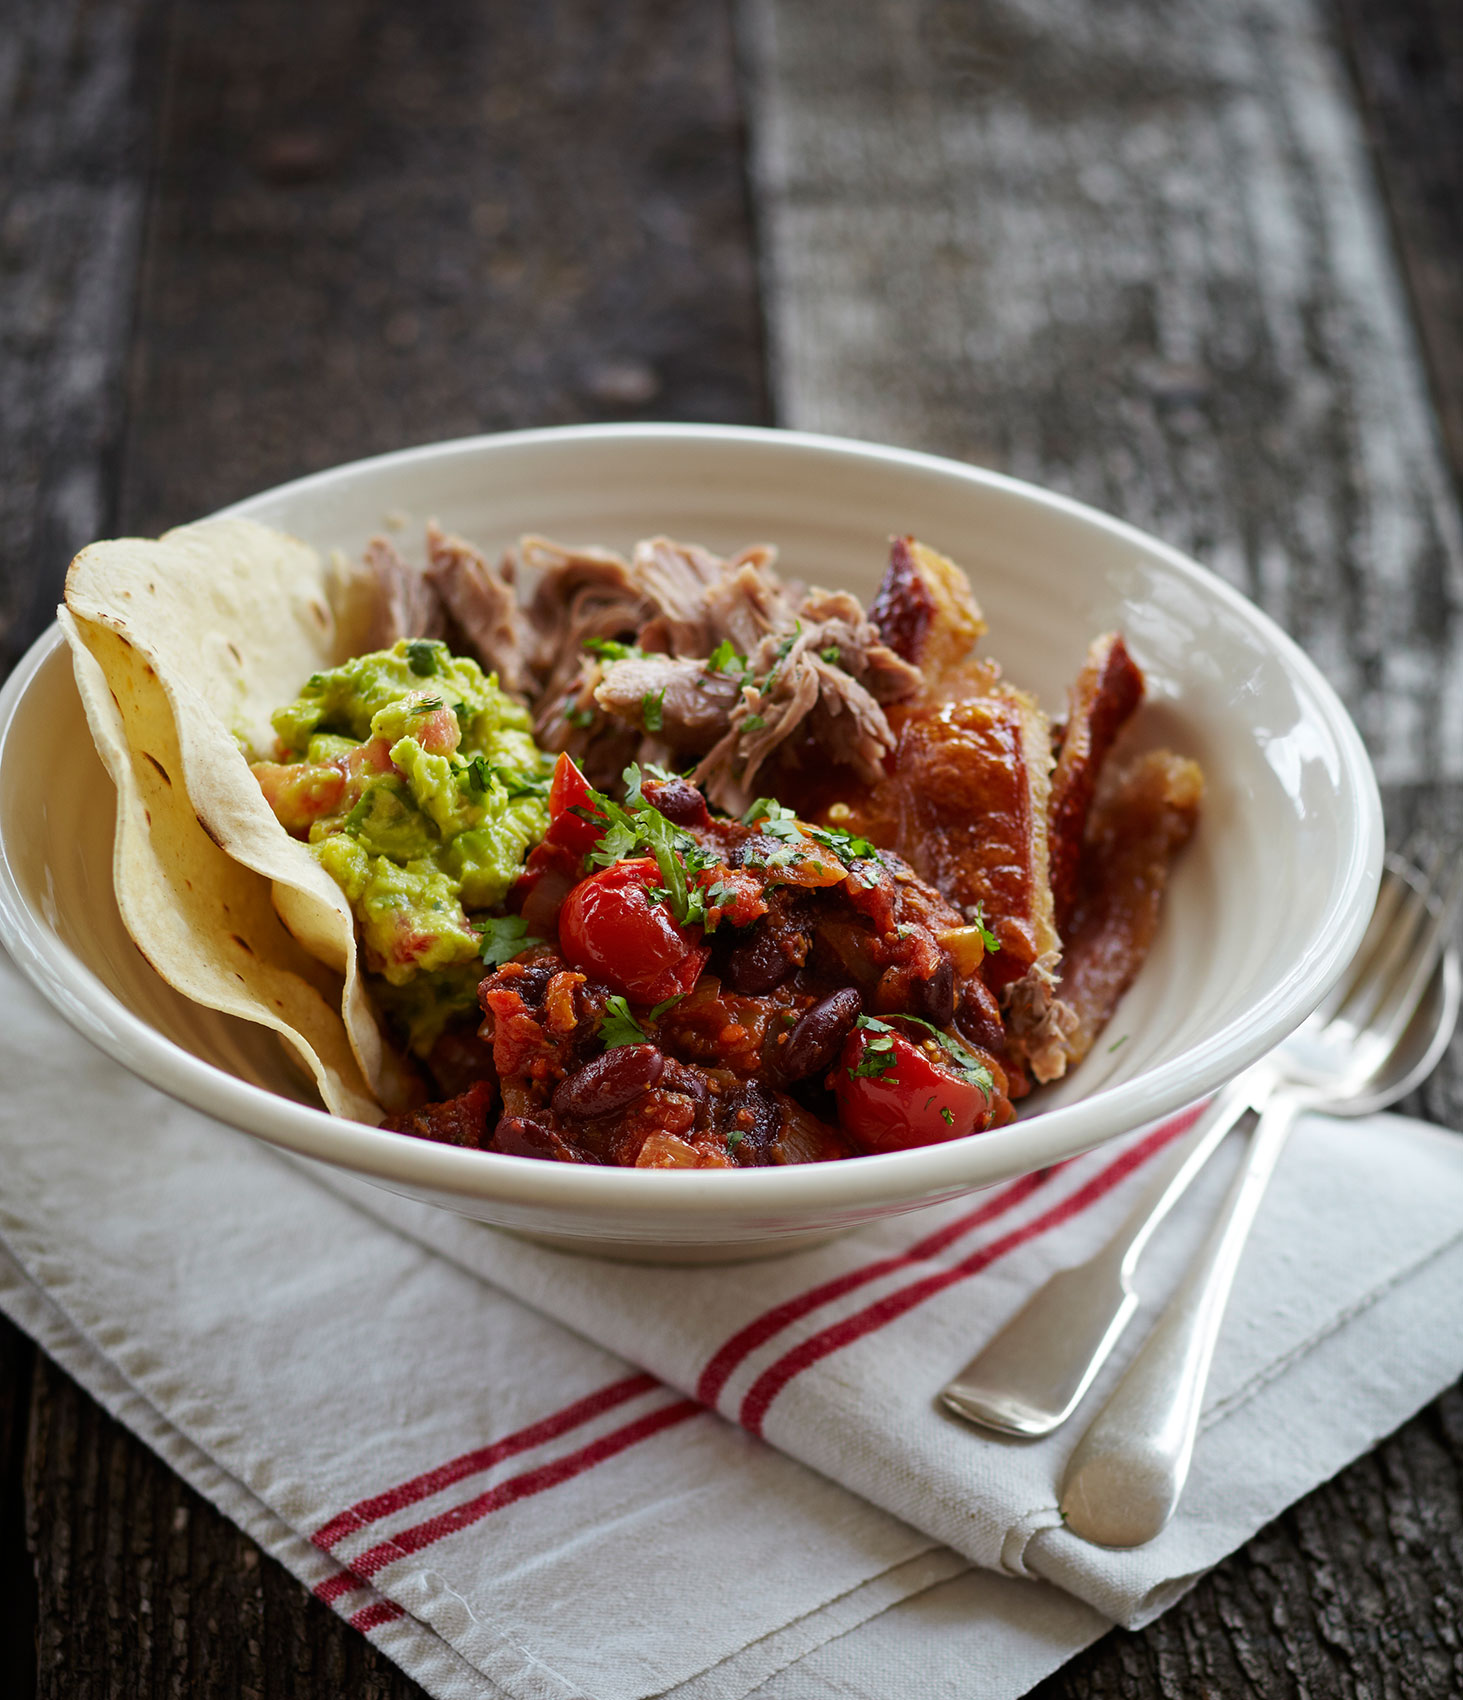 Free Range in the City • Mexican Pulled Pork & Beans with Tortillas & Guacamole • Cookbook & Lifestyle Food Photography